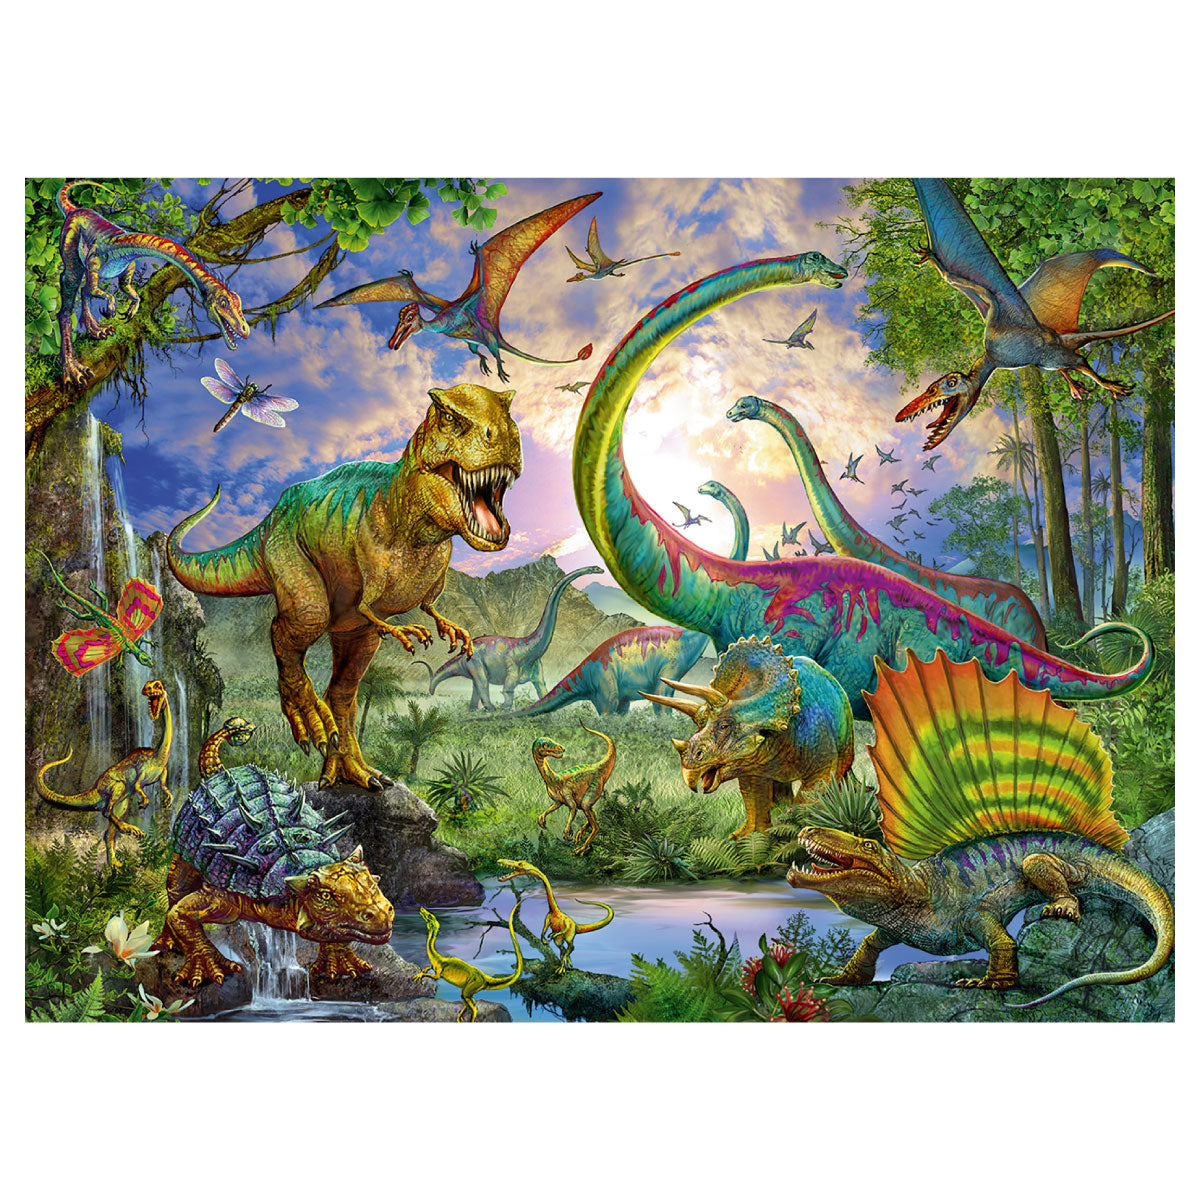 Realm of the Giants 200 pc XXL Jigsaw Puzzle from Ravensburger